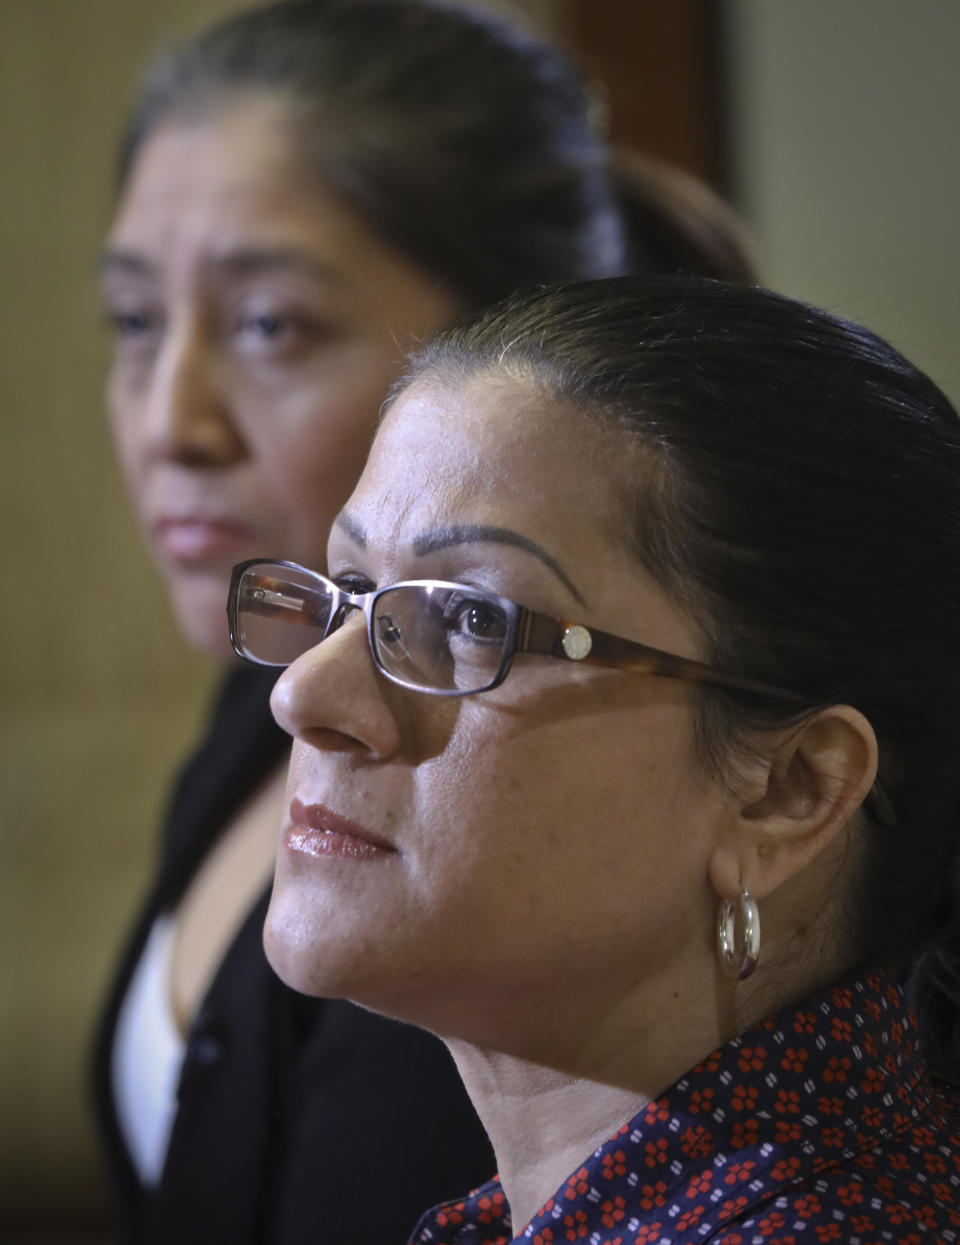 Victorina Morales, left, and Sandra Diaz, right, listen during an interview where they recalled their experience working at President Donald Trump's golf resort in Bedminster, N.J., Friday Dec. 7, 2018, in New York. The women say they used false legal documents to get hired and supervisors knew it. (AP Photo/Bebeto Matthews)